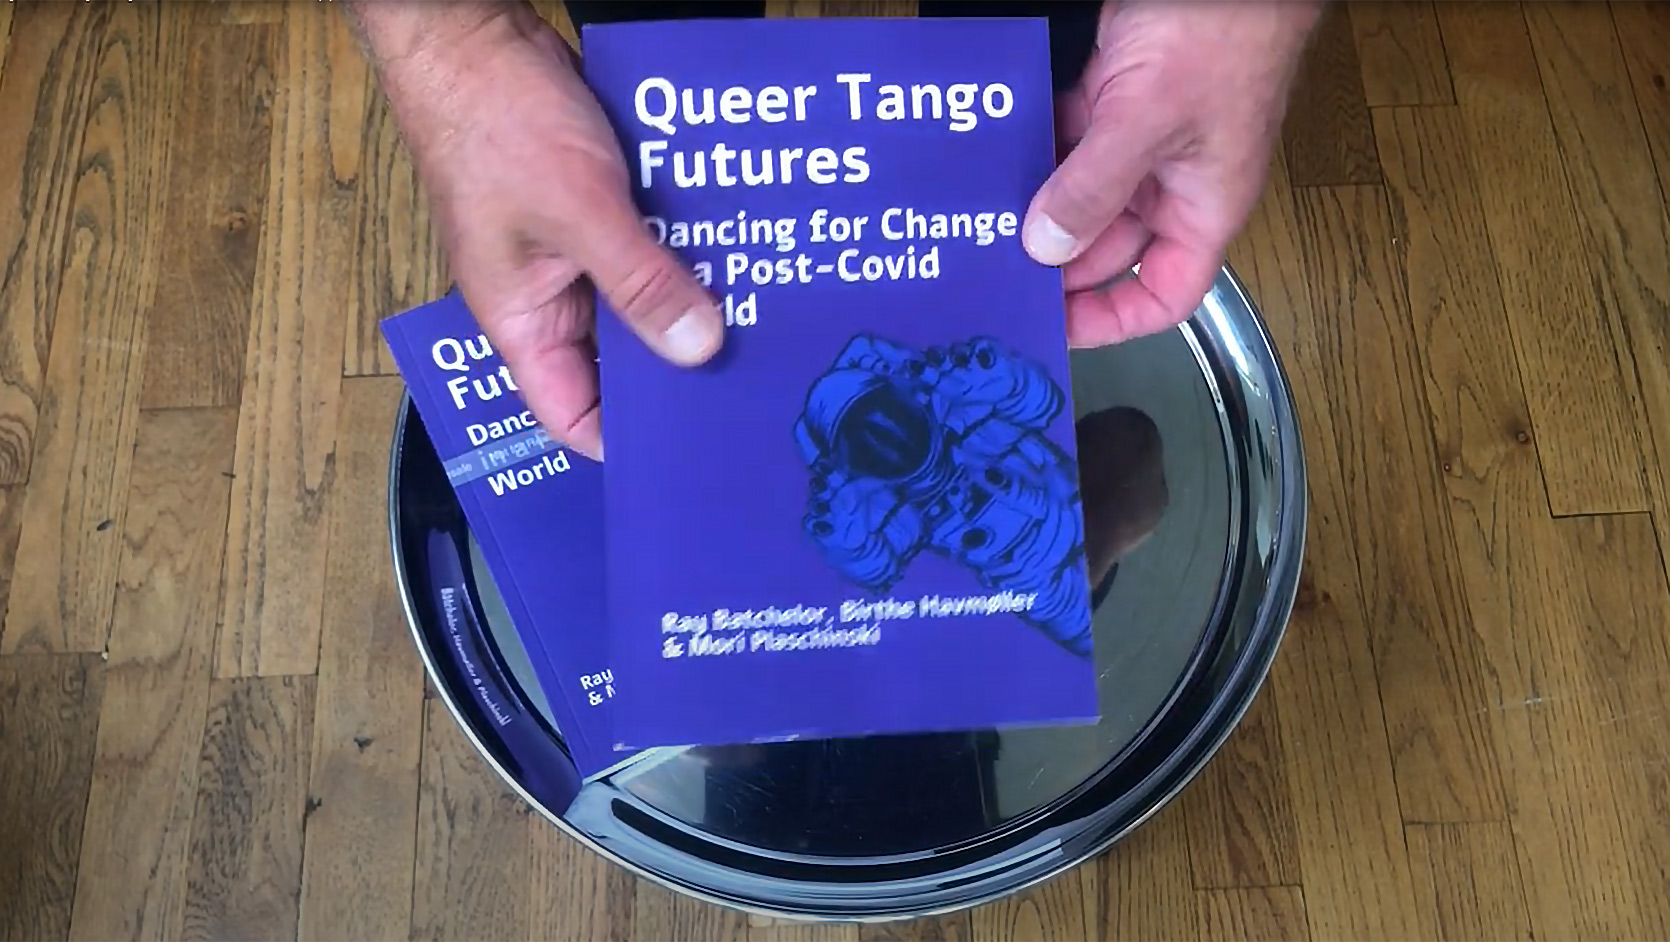 “Queer Tango Futures” – is now available as a “REAL” book!